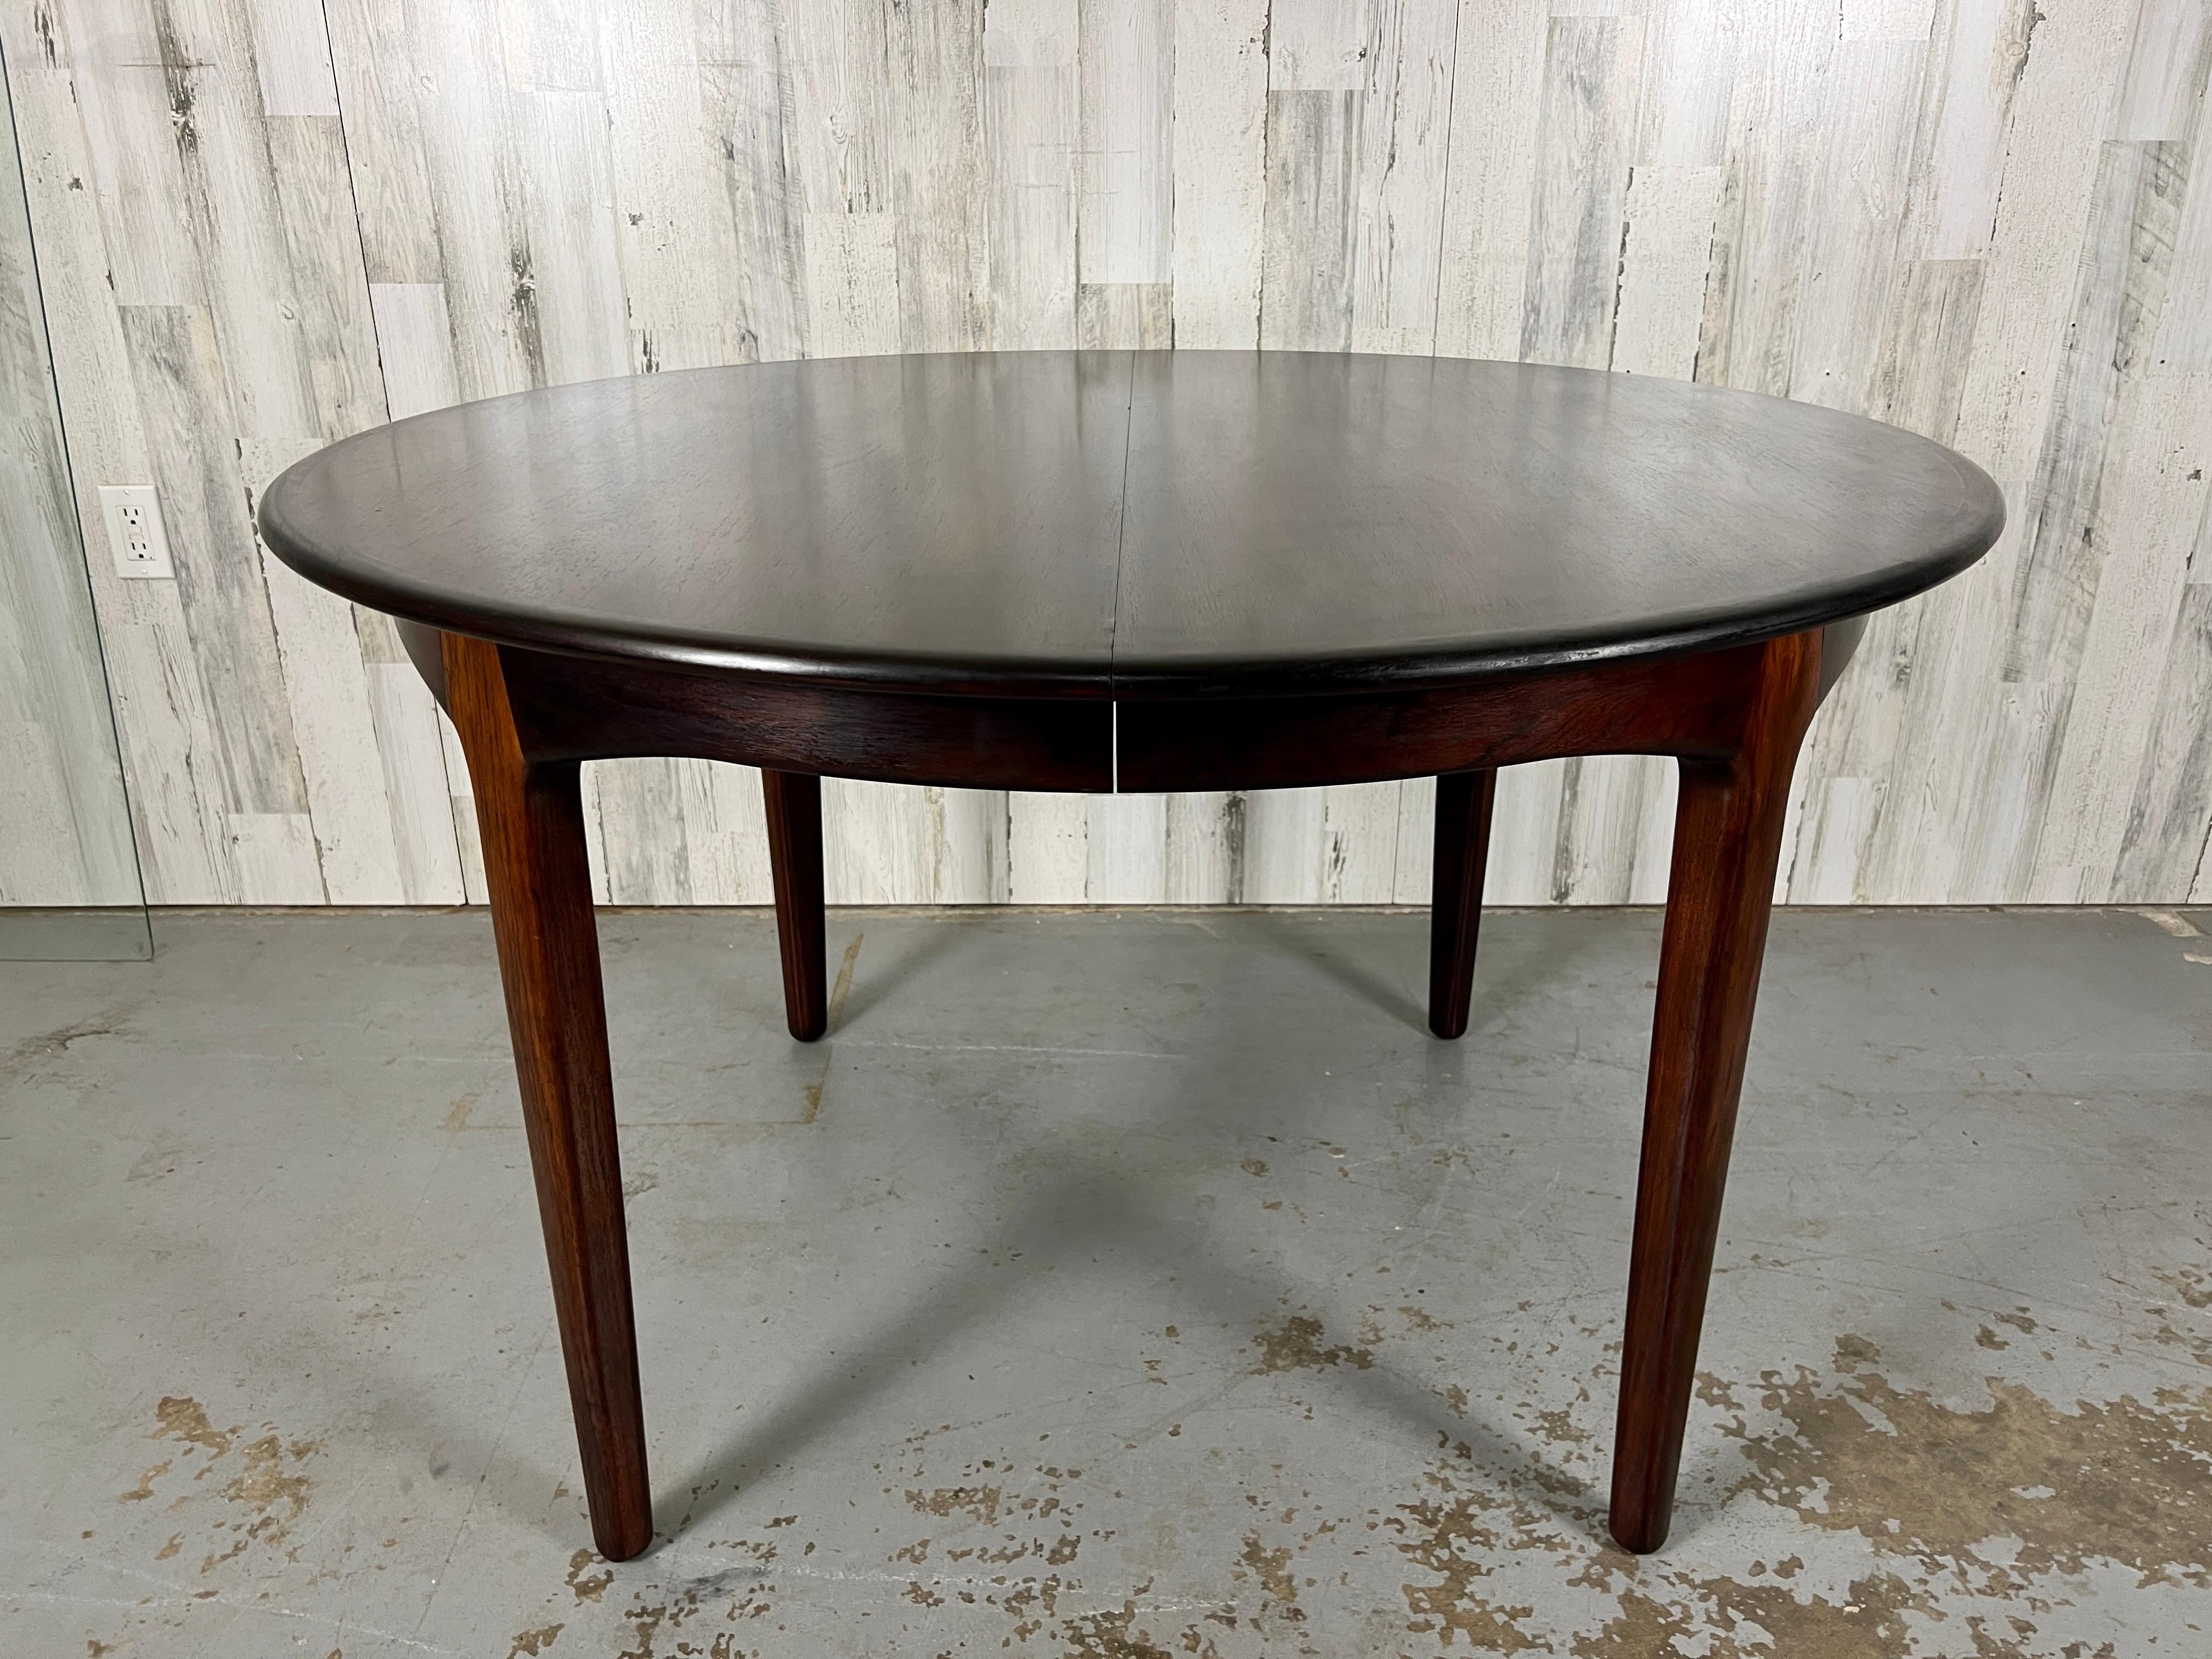 Combination of solid and veneered rosewood round Danish Modern dining table with four leaves, one has a matching apron the other three do not have the apron. This table can seat 10-12 people. Total width with leaves is 126